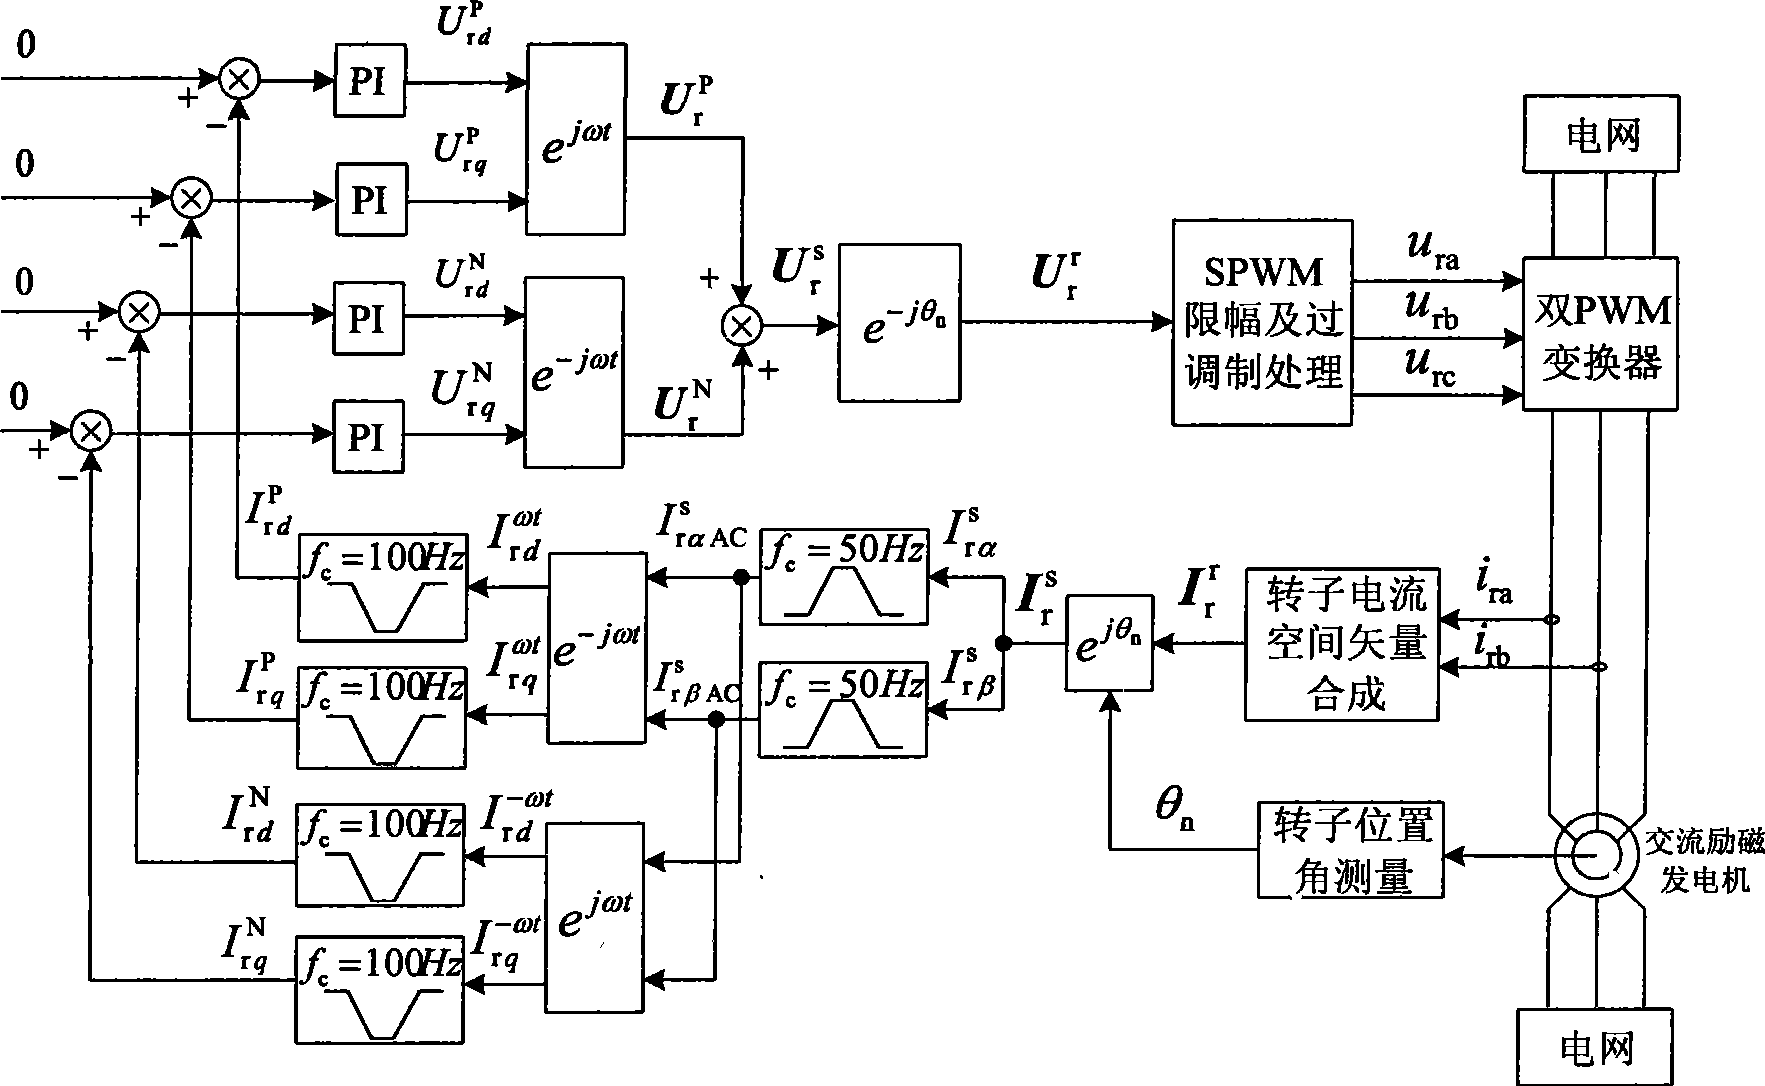 Low voltage traversing control method for double feeding wind power generator when short circuit failure of electric network